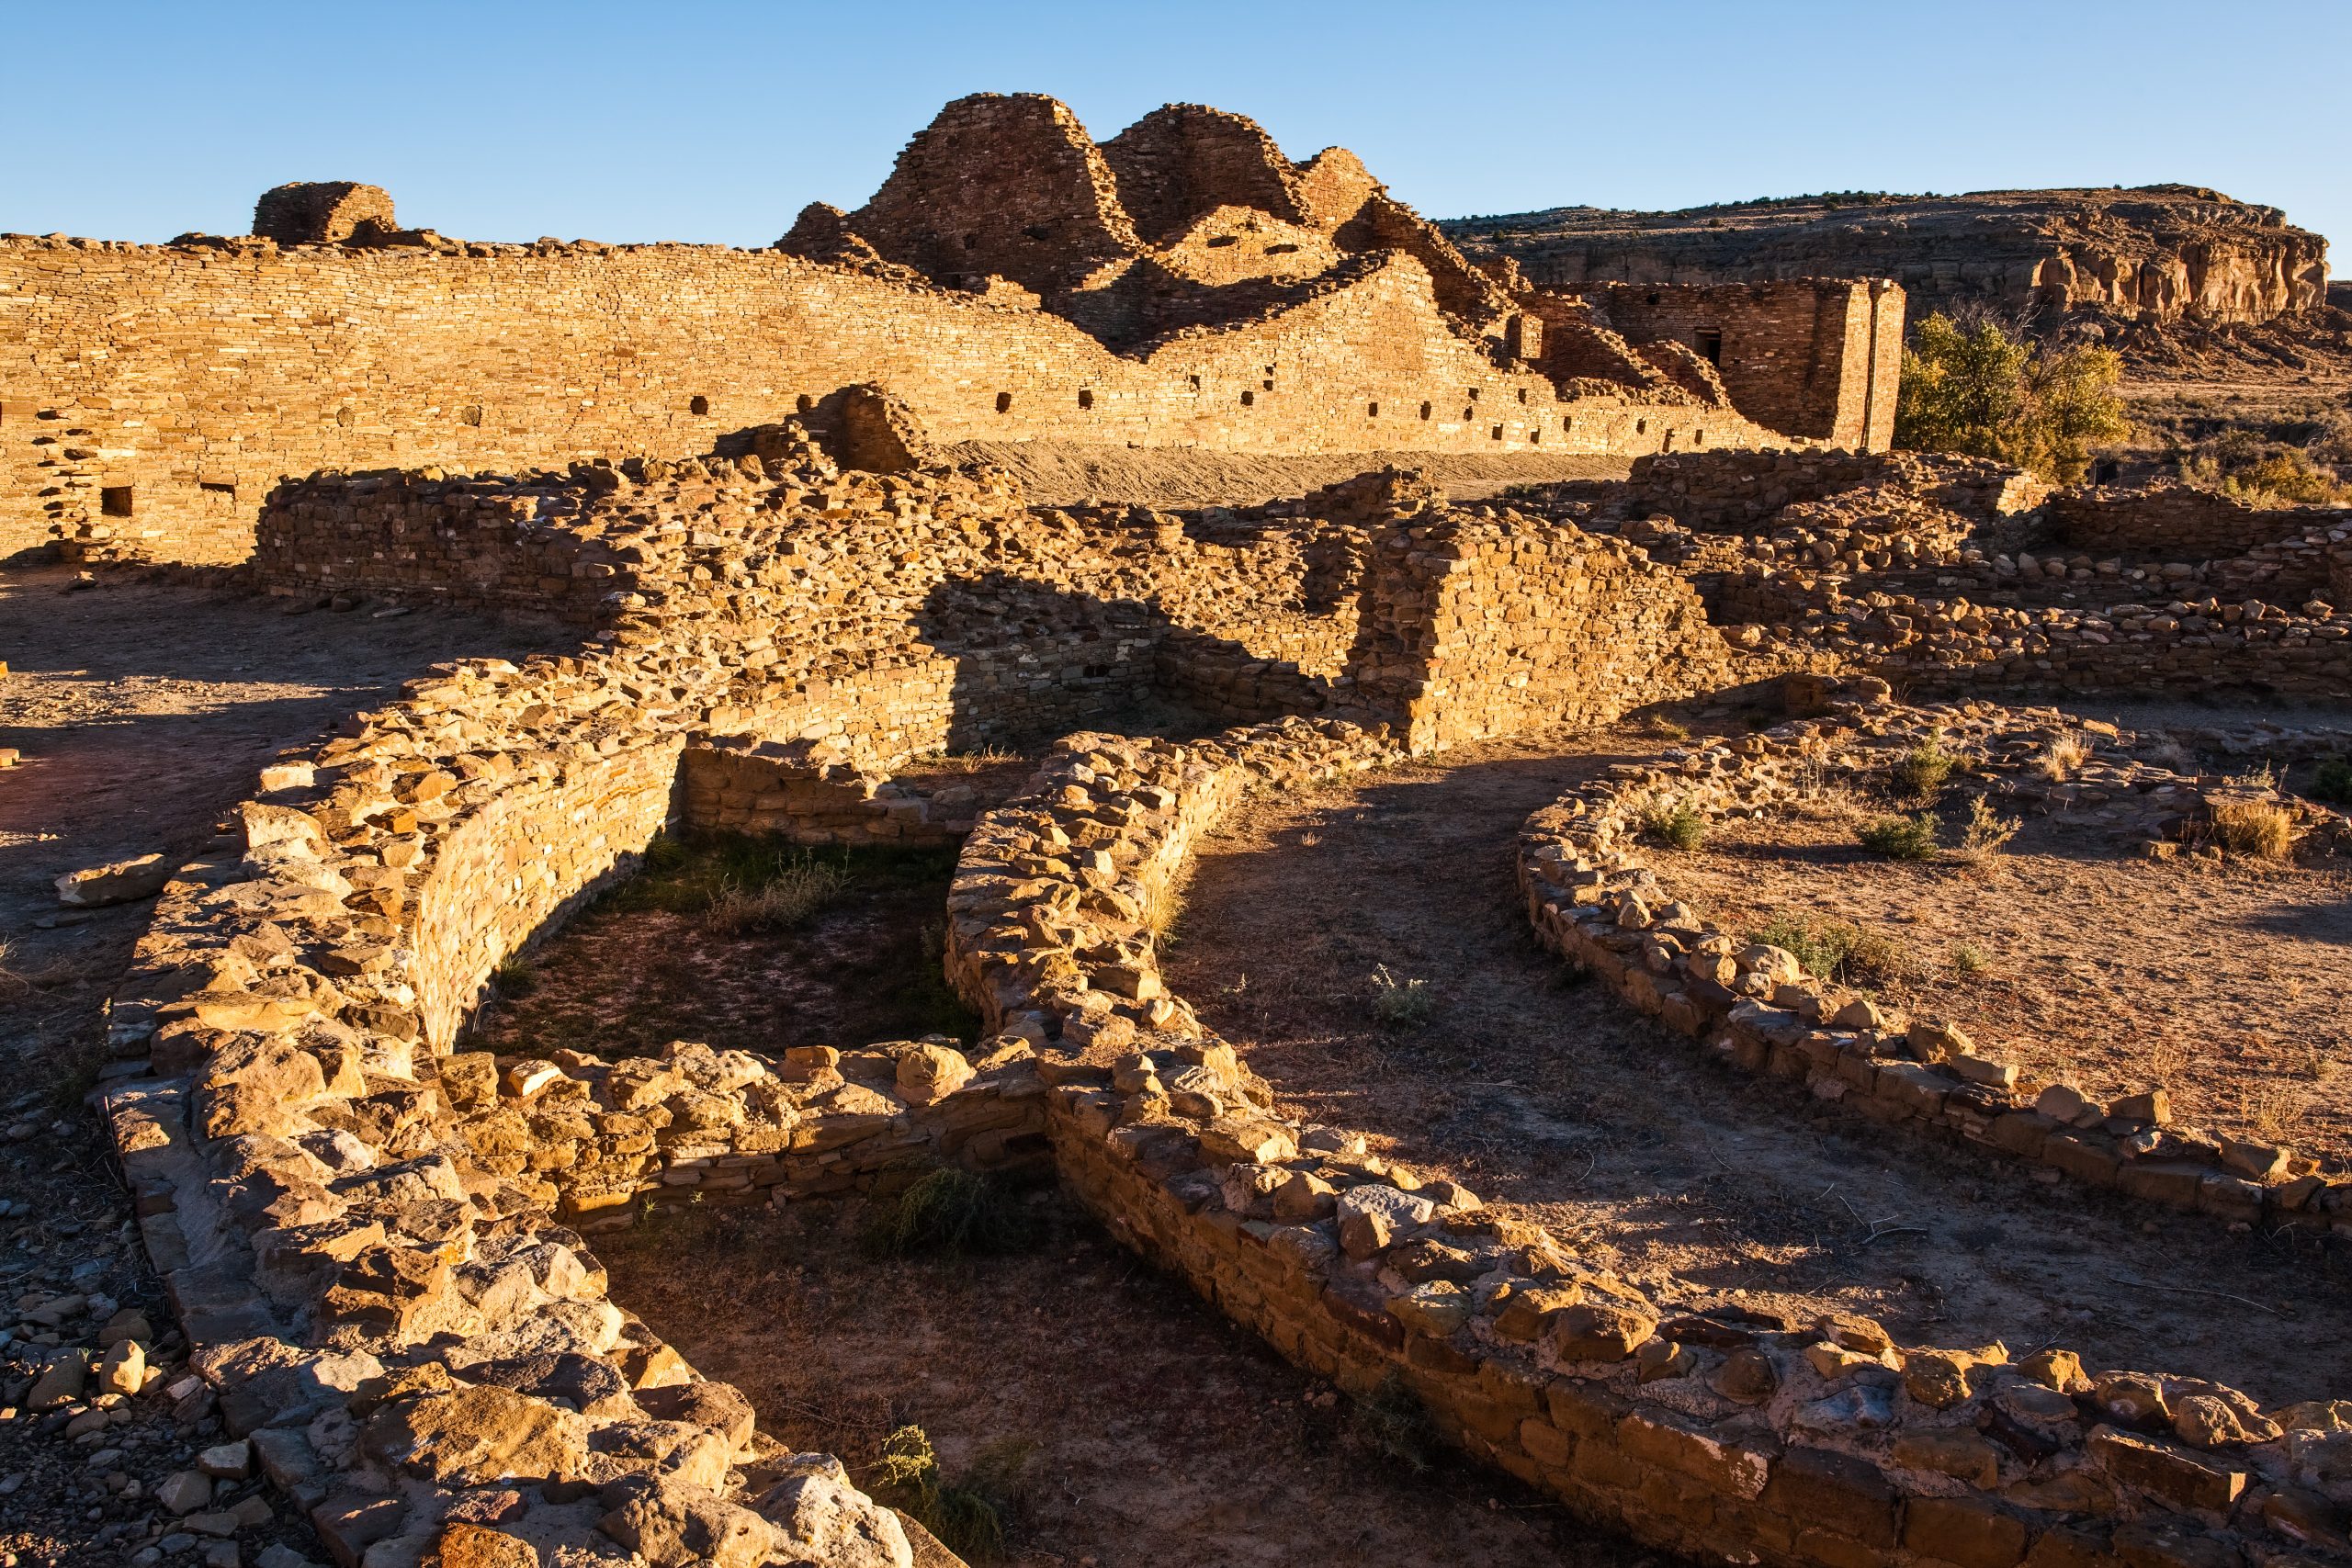 President Biden Bans New Oil and Gas Drilling at a UNESCO World Heritage Site in New Mexico to Preserve Archaeological Ruins | Artnet News